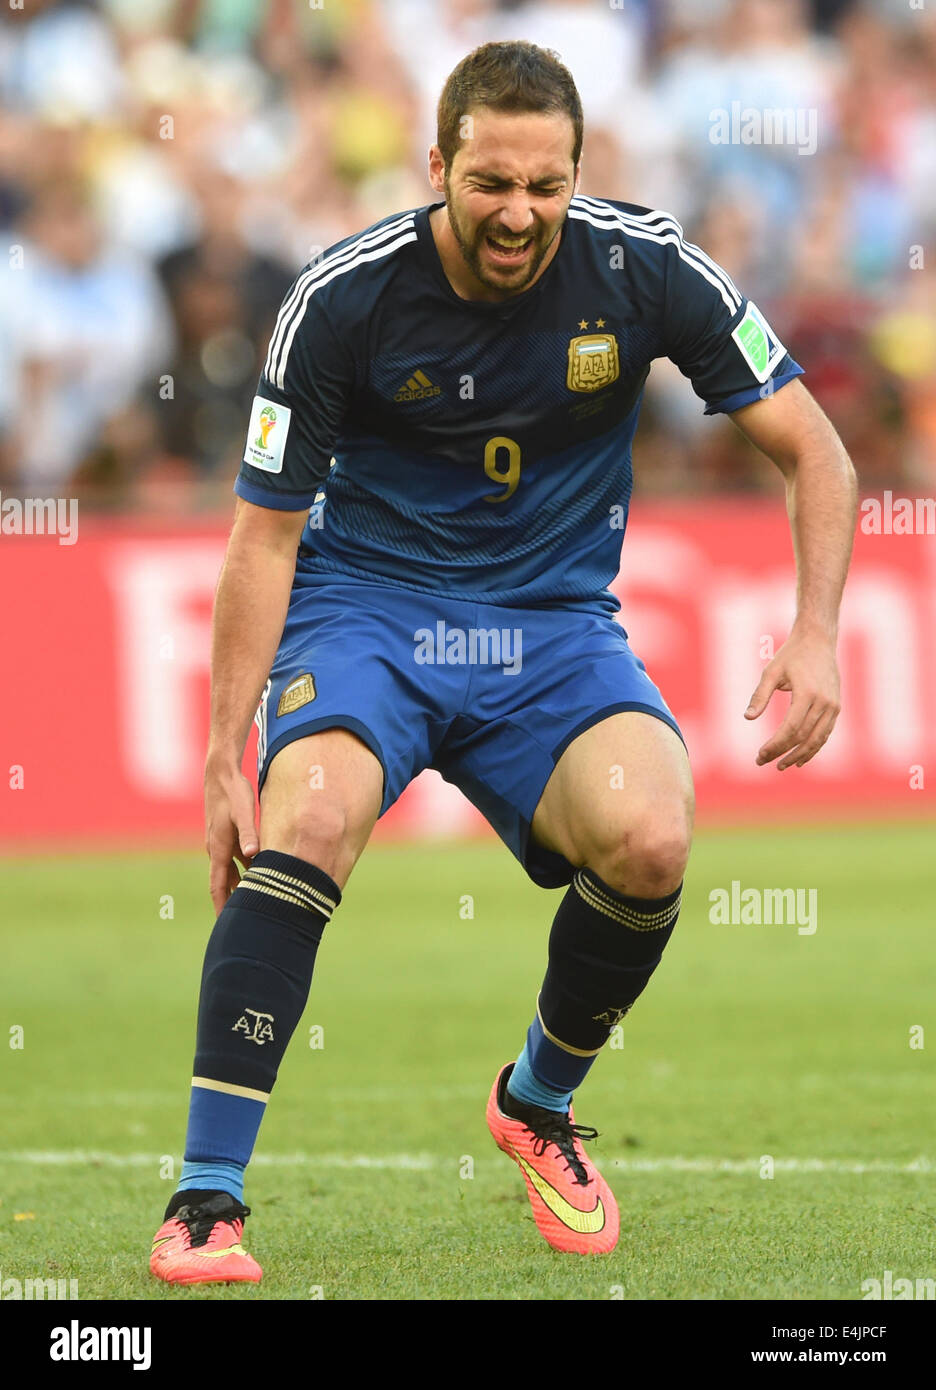 Rio de Janeiro, Brazil. 13th July, 2014. Gonzalo Higuain of Argentina reacts during the FIFA World Cup 2014 final soccer match between Germany and Argentina at the Estadio do Maracana in Rio de Janeiro, Brazil, 13 July 2014. Photo: Andreas Gebert/dpa/Alamy Live News Stock Photo